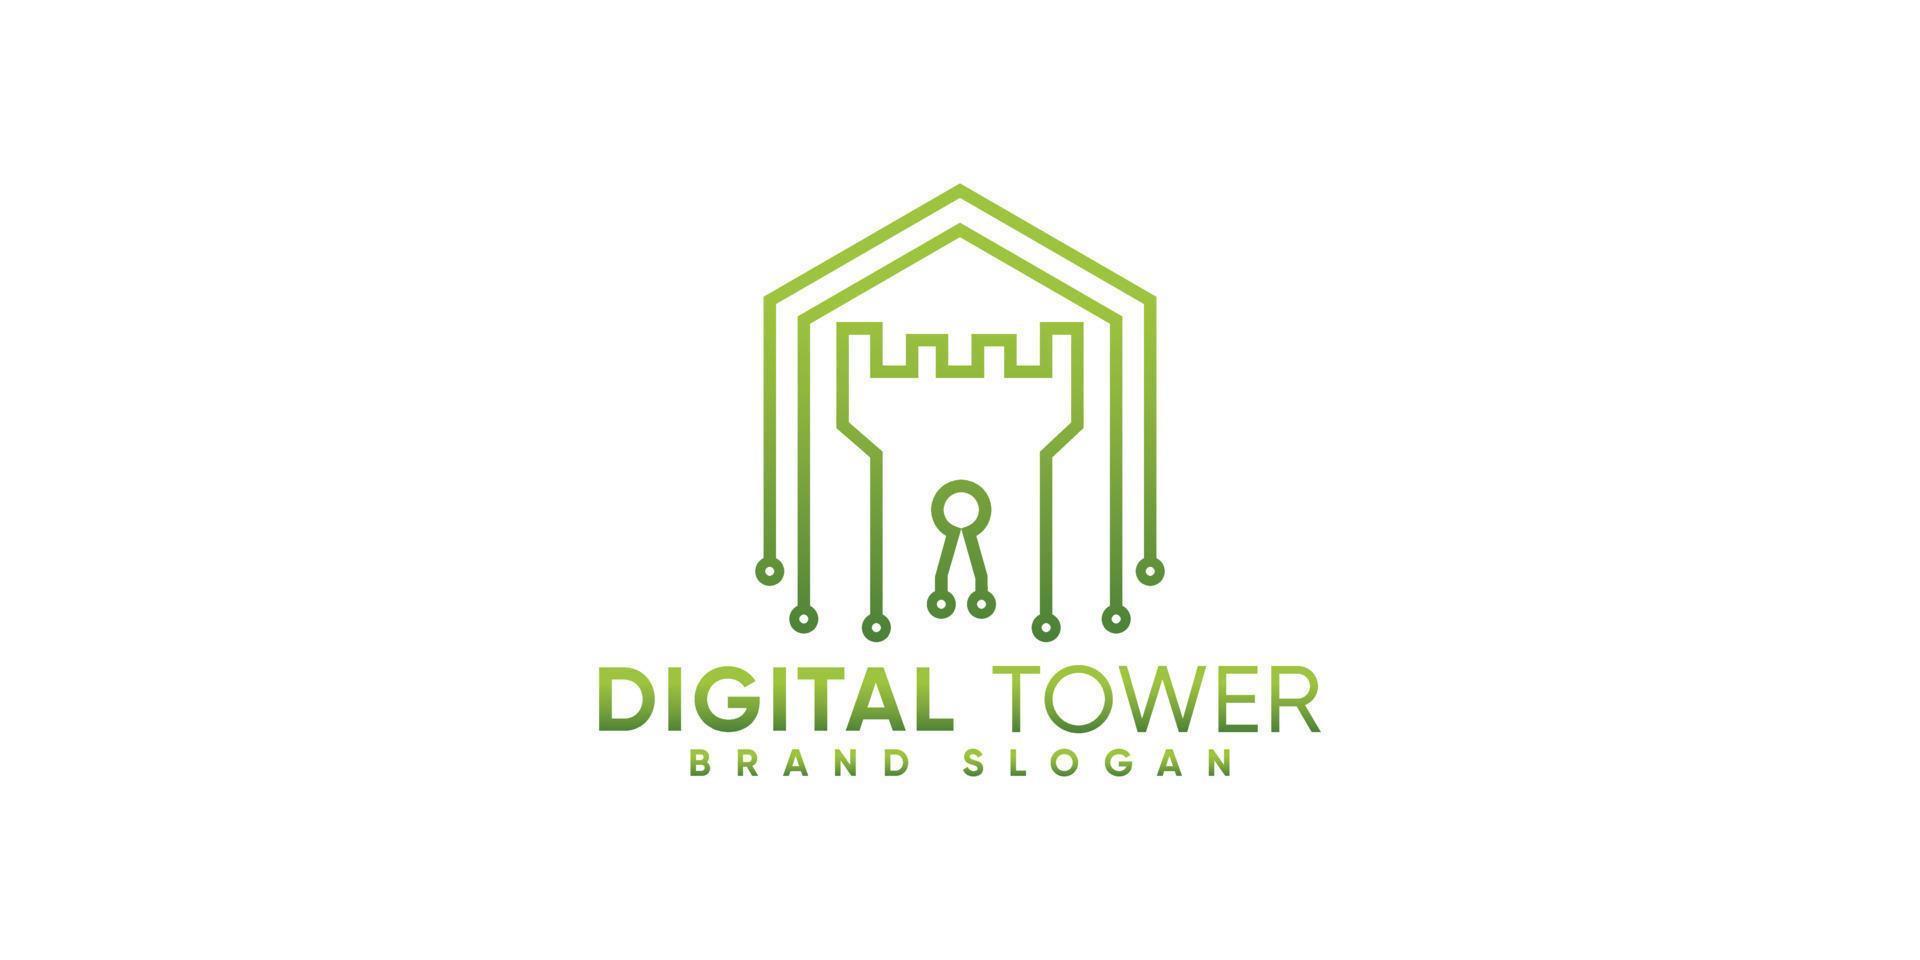 SIMPLE DIGITAL SECURITY TOWER LOGO WITH MODERN STYLE PREMIUM VECTOR